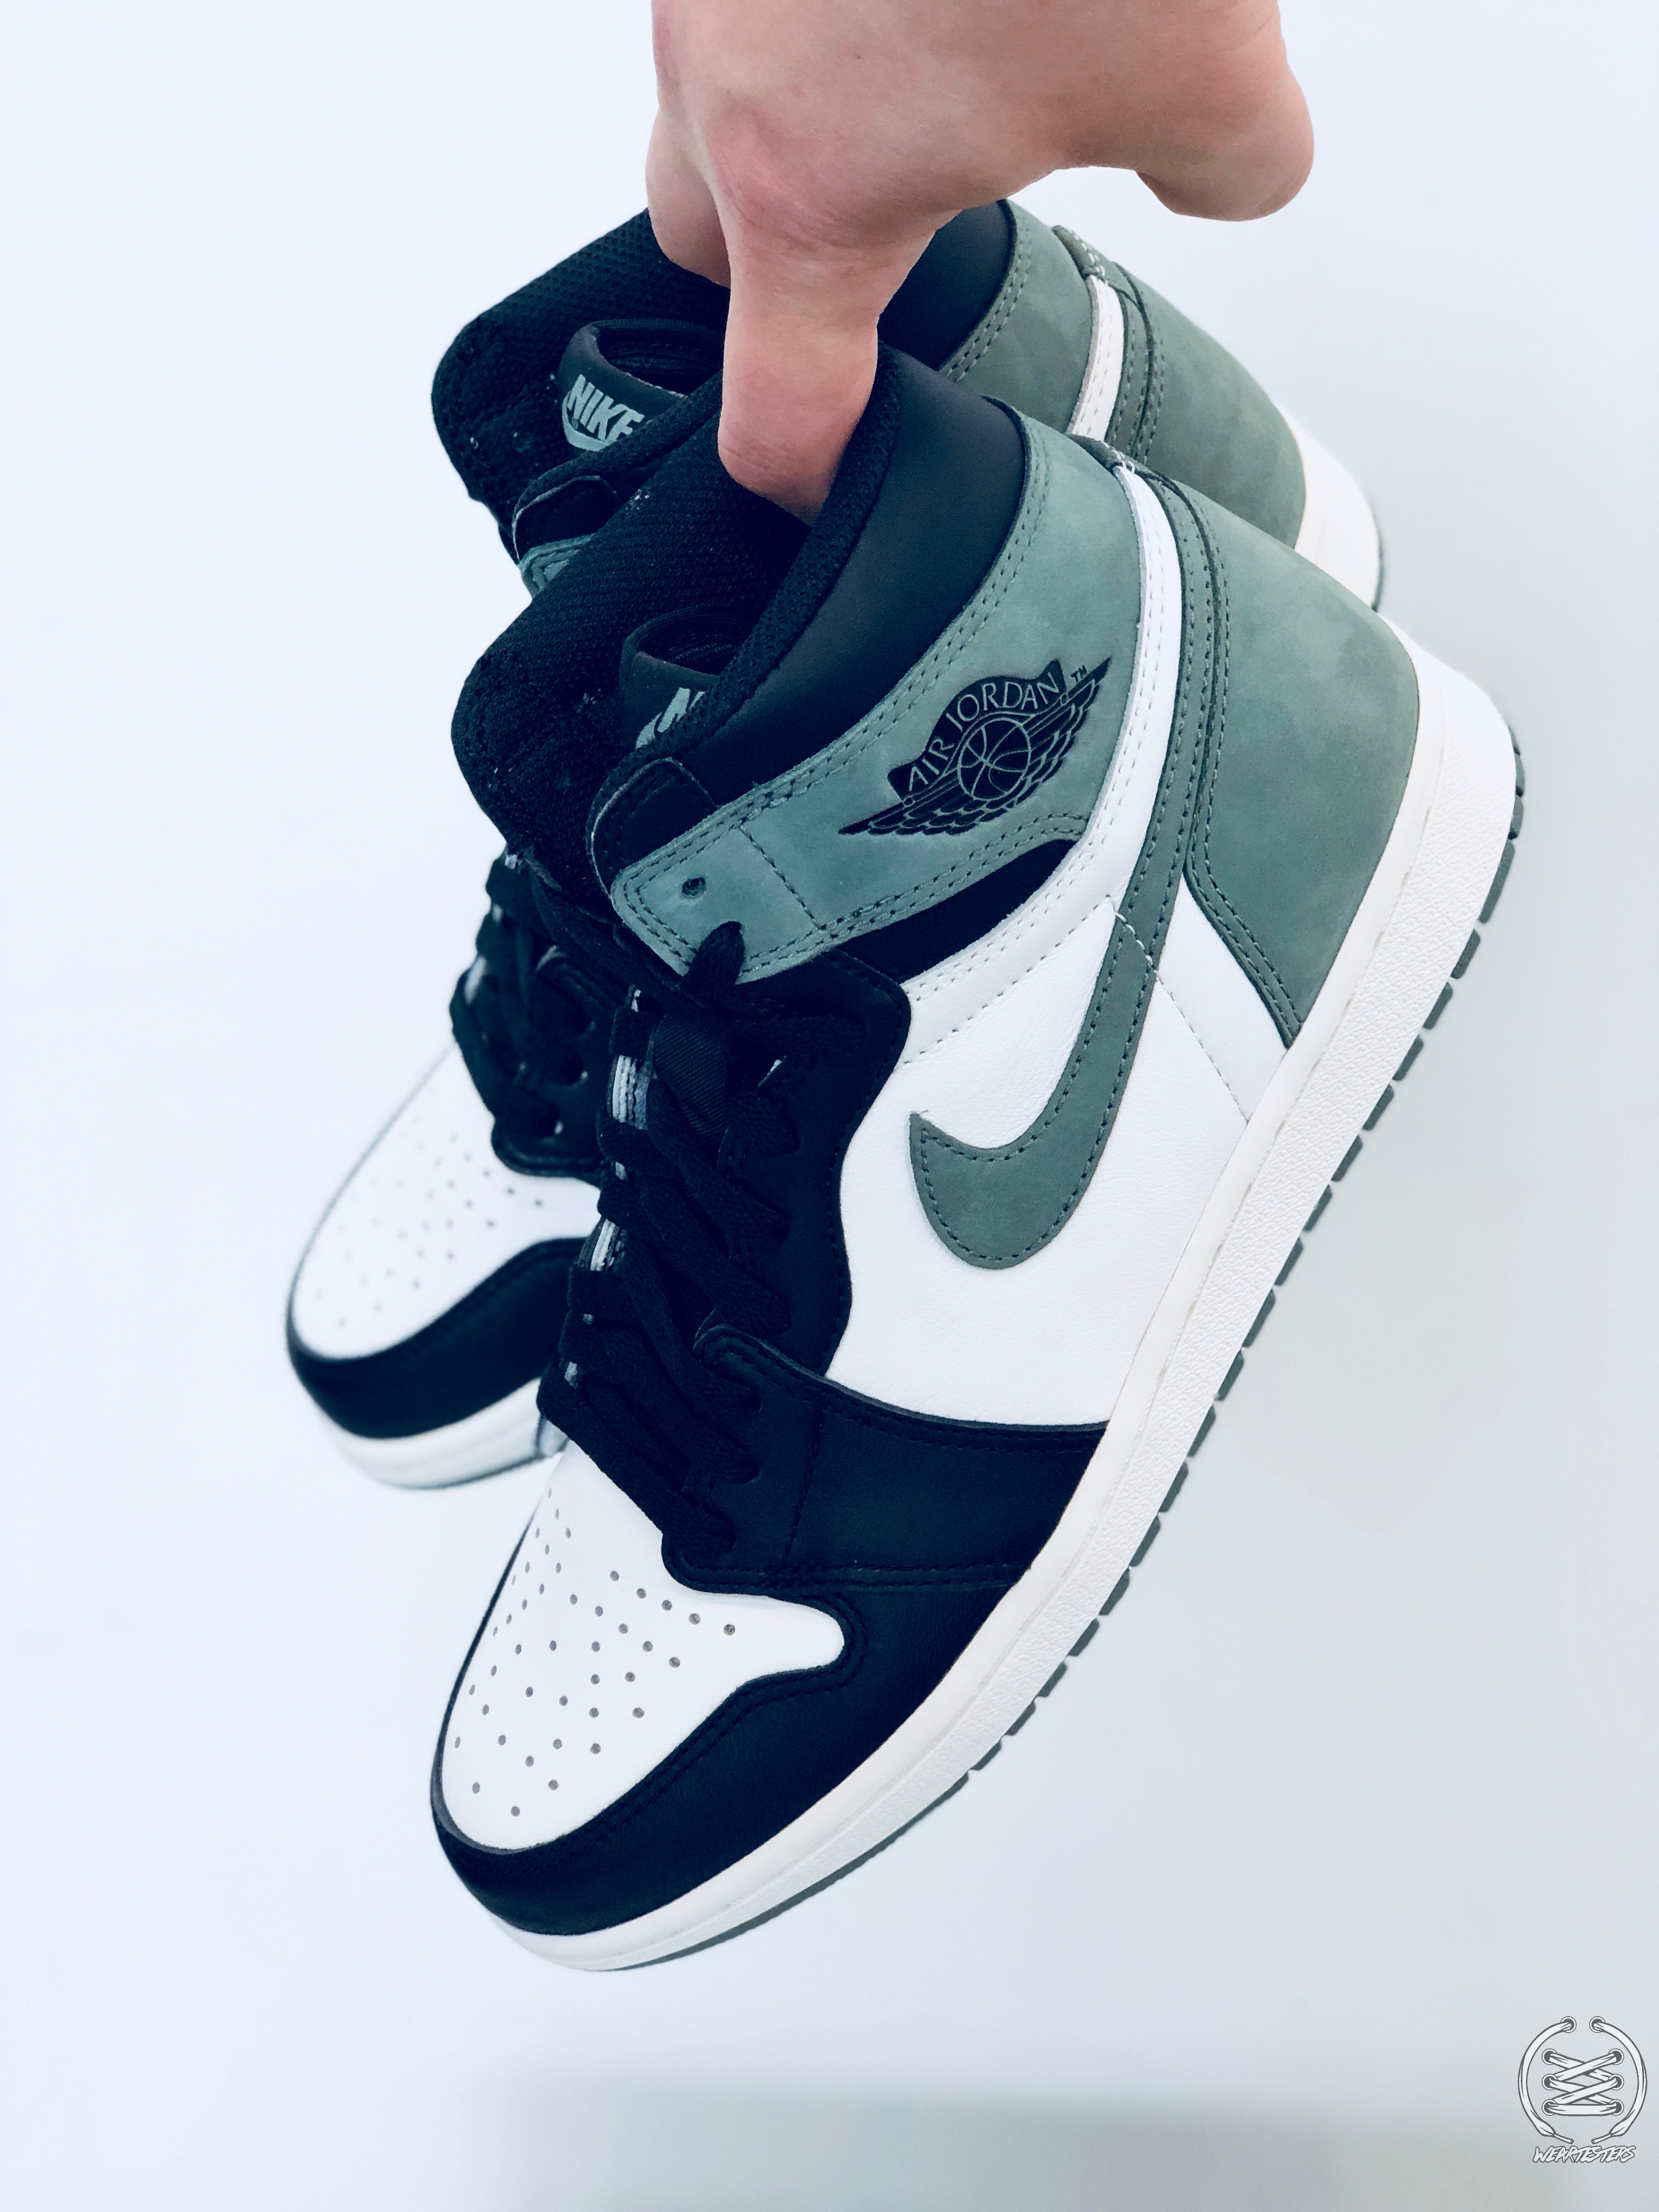 Only the Air Jordan 1 'Clay Green' and 